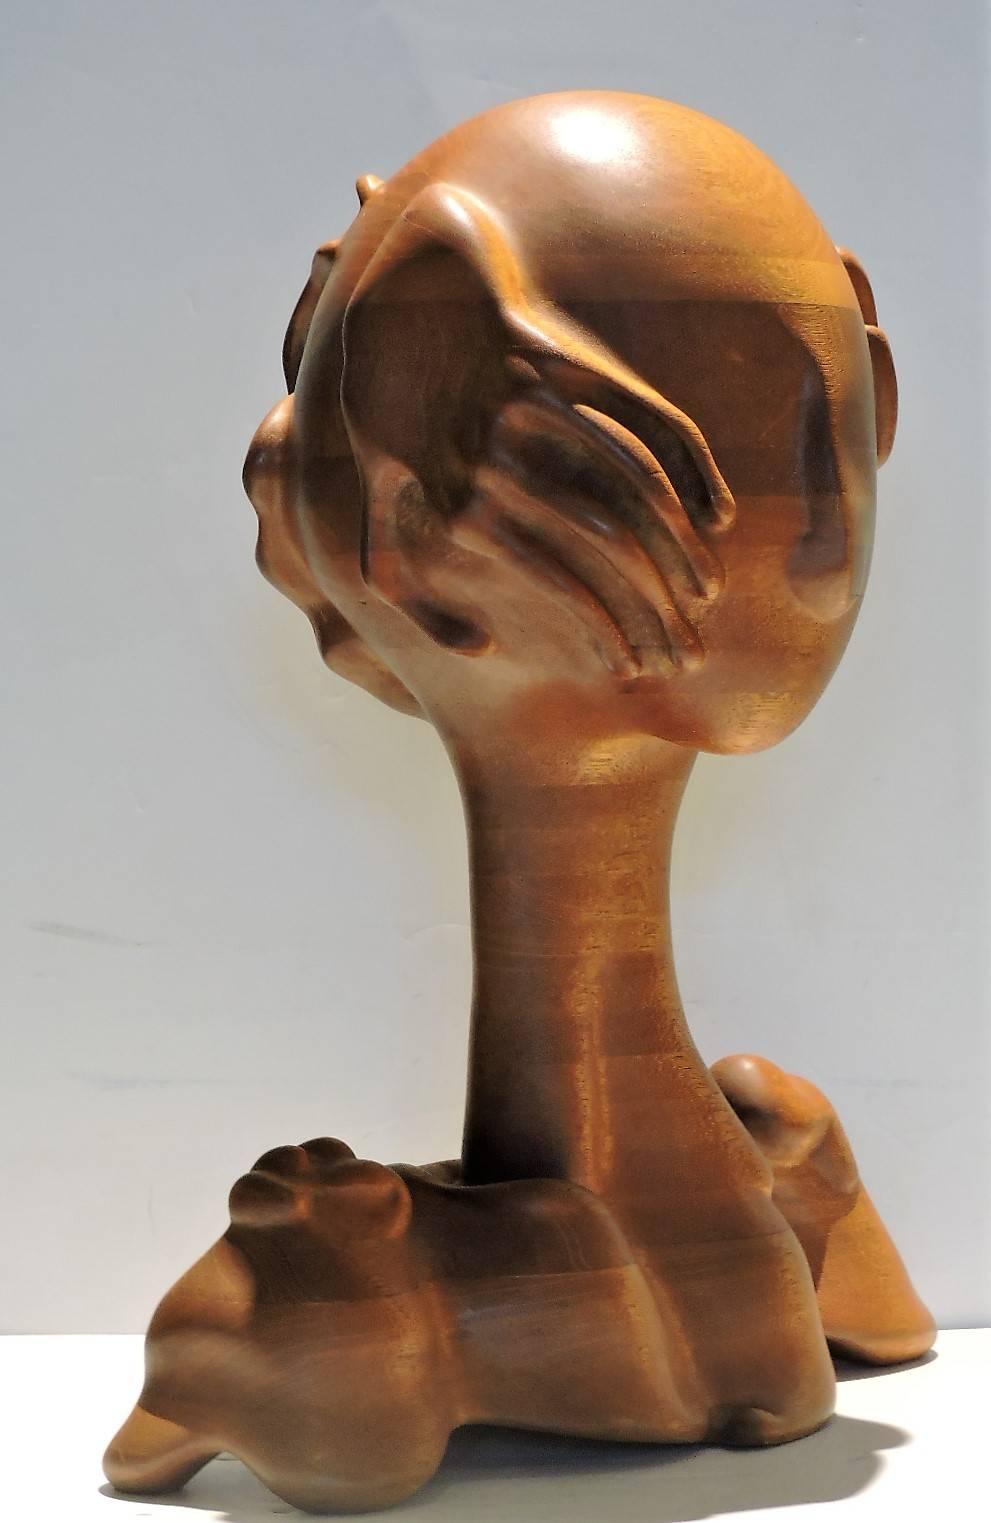 A large stack laminated finely carved mahogany sculpture of head with shoulders and hands in the exotic surrealist manner of Pedro Friedeberg by noteworthy American artist sculptor and founder of the Zenith Gallery in Washington D.C. - Margery